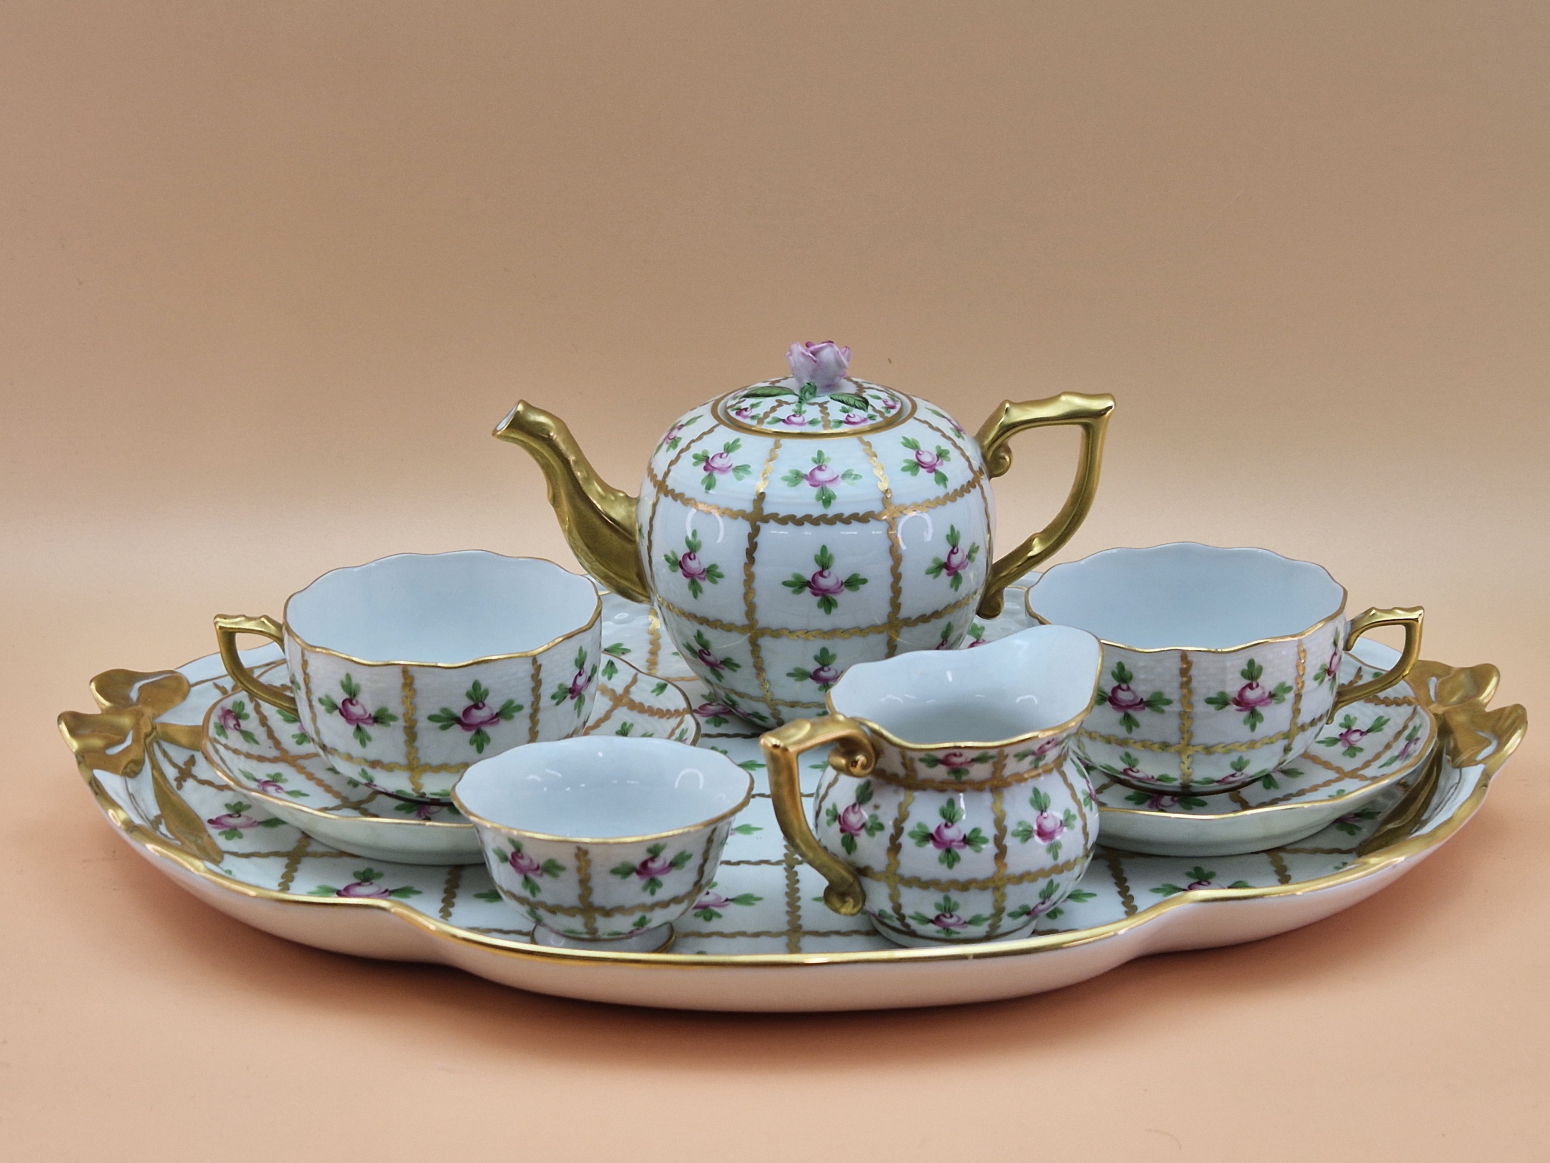 A HEREND CABARET SET, EACH PIECE WITH GILT DIAMOND DIAPER CENTRED BY A PINK ROSE AND FOUR GREEN - Image 2 of 4